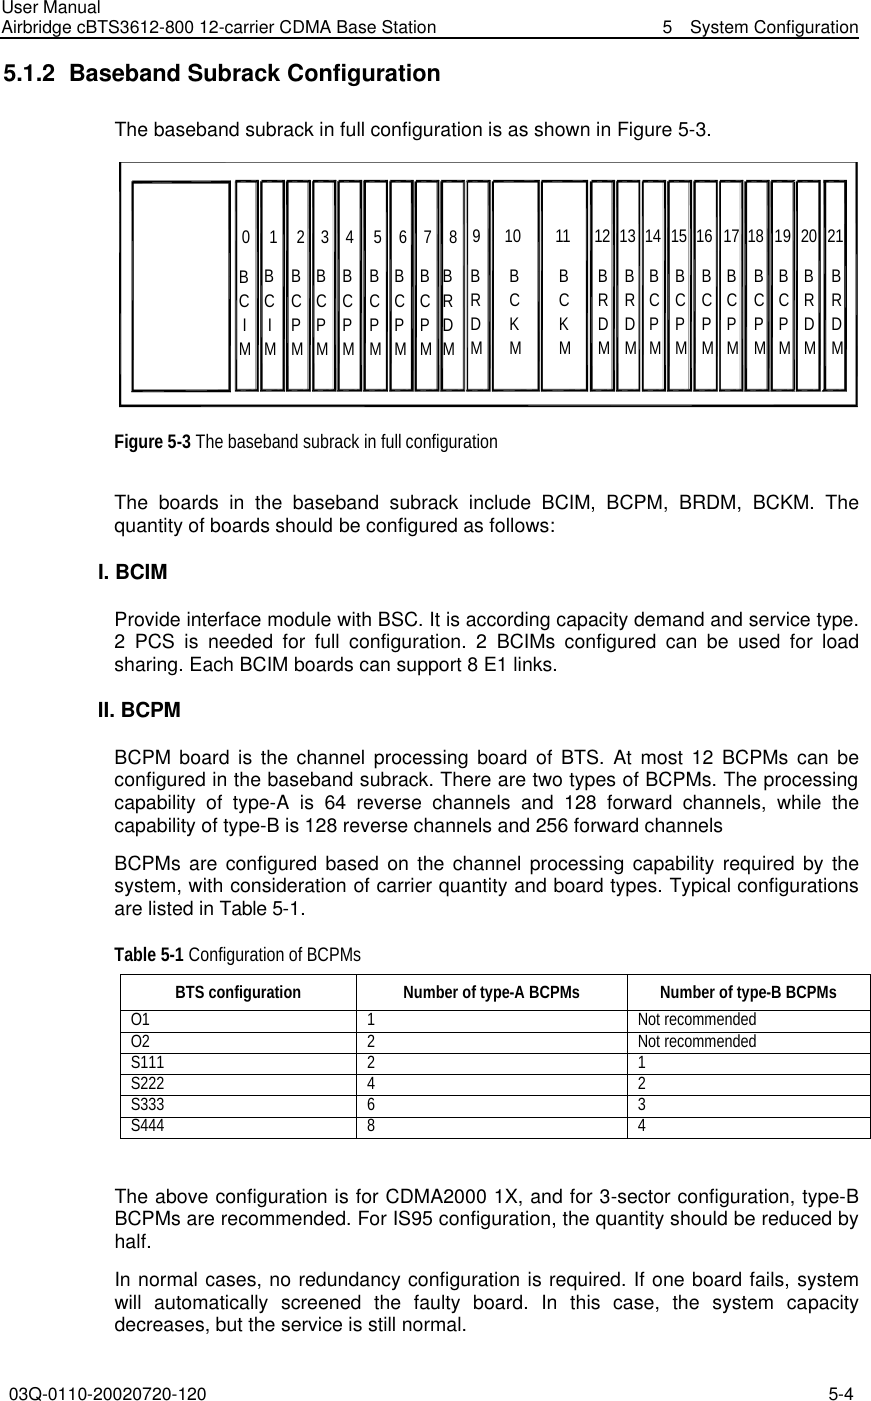 User Manual Airbridge cBTS3612-800 12-carrier CDMA Base Station   5  System Configuration 03Q-0110-20020720-120 5-4  5.1.2  Baseband Subrack Configuration The baseband subrack in full configuration is as shown in Figure 5-3.   0BC IM1BC IM2BCPM3BCPM4BCPM5BCPM6BCPM7BCPM8BRDMBRDMBCKMBCKMBRDMBRDMBCPMBCPMBCPMBCPMBCPMBCPMBRDMBRDM10 11 12 13 14 15 16 17 18 19 20 219 Figure 5-3 The baseband subrack in full configuration   The boards in the baseband subrack include BCIM,  BCPM,  BRDM,  BCKM. The quantity of boards should be configured as follows: I. BCIM Provide interface module with BSC. It is according capacity demand and service type. 2 PCS is needed for full configuration. 2 BCIMs configured can be used for load sharing. Each BCIM boards can support 8 E1 links.   II. BCPM BCPM board is the channel processing board of BTS. At most 12 BCPMs can be configured in the baseband subrack. There are two types of BCPMs. The processing capability of type-A is 64 reverse channels and 128 forward channels, while the capability of type-B is 128 reverse channels and 256 forward channels BCPMs are configured based on the channel processing capability required by the system, with consideration of carrier quantity and board types. Typical configurations are listed in Table 5-1.   Table 5-1 Configuration of BCPMs BTS configuration Number of type-A BCPMs Number of type-B BCPMs O1 1 Not recommended O2 2 Not recommended S111 2 1 S222 4 2 S333 6 3 S444 8 4  The above configuration is for CDMA2000 1X, and for 3-sector configuration, type-B BCPMs are recommended. For IS95 configuration, the quantity should be reduced by half. In normal cases, no redundancy configuration is required. If one board fails, system will automatically screened the faulty board. In this case, the system capacity decreases, but the service is still normal.   